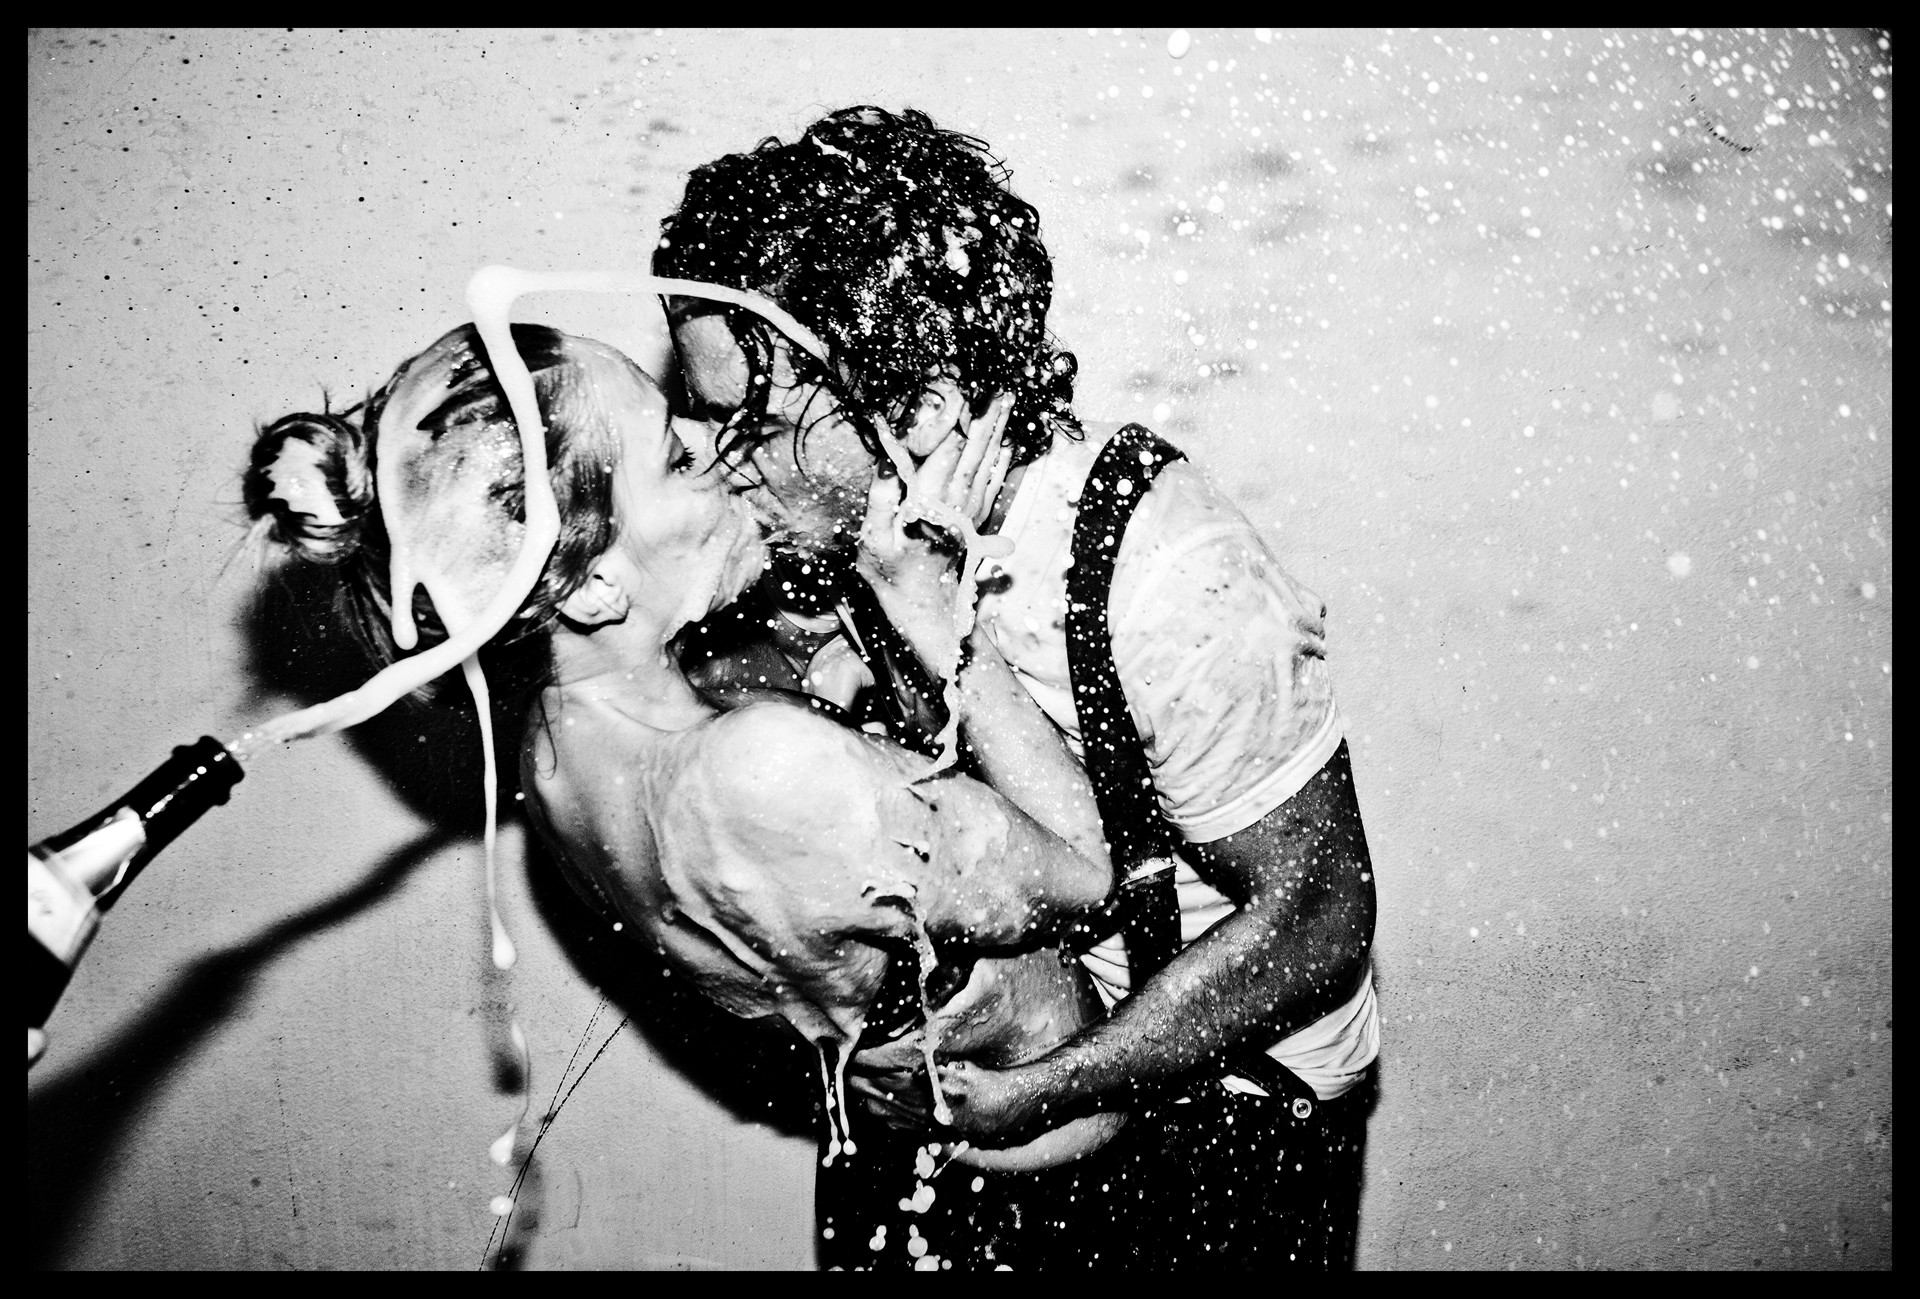 Champagne Kiss by Tyler Shields